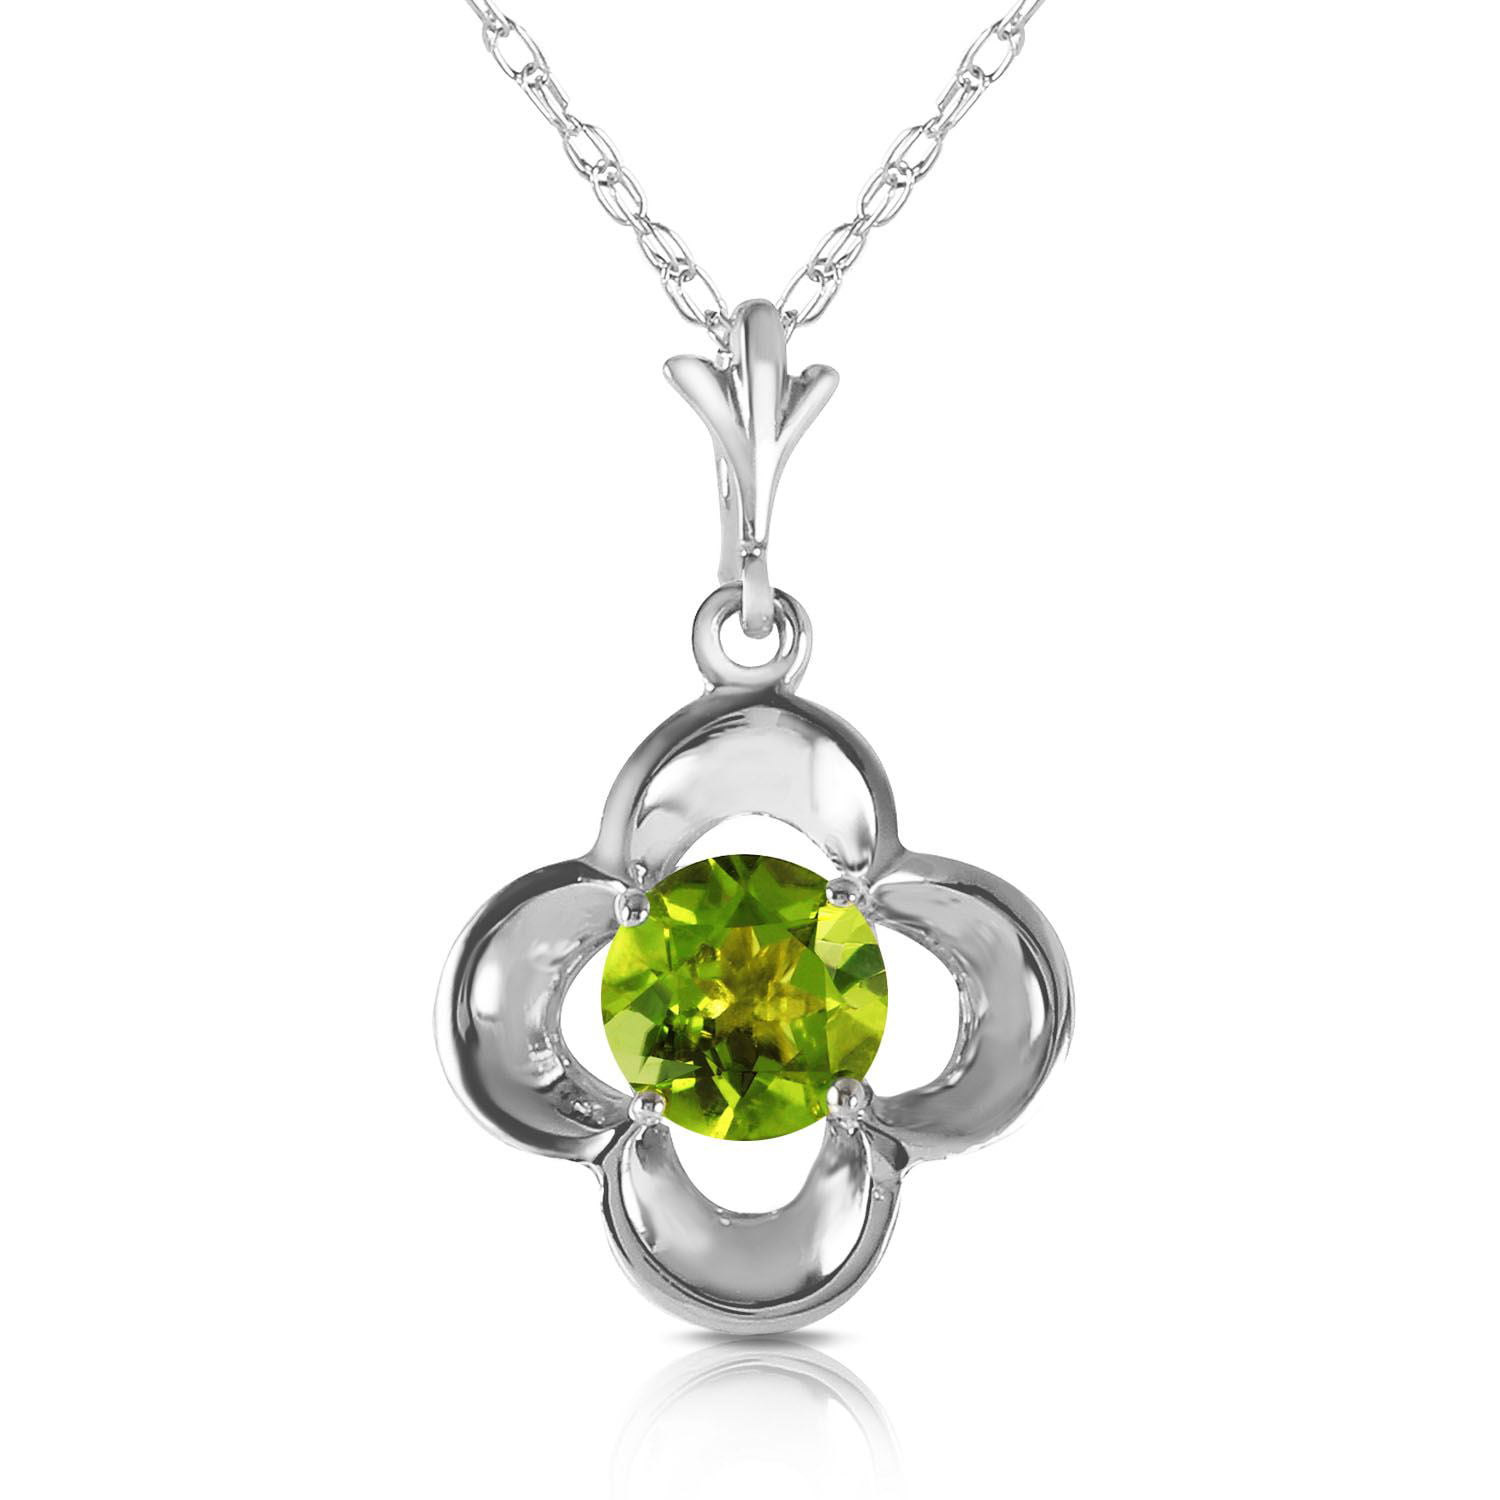 ALARRI 0.55 CTW 14K Solid White Gold The Mind Shines Peridot Necklace with 20 Inch Chain Length